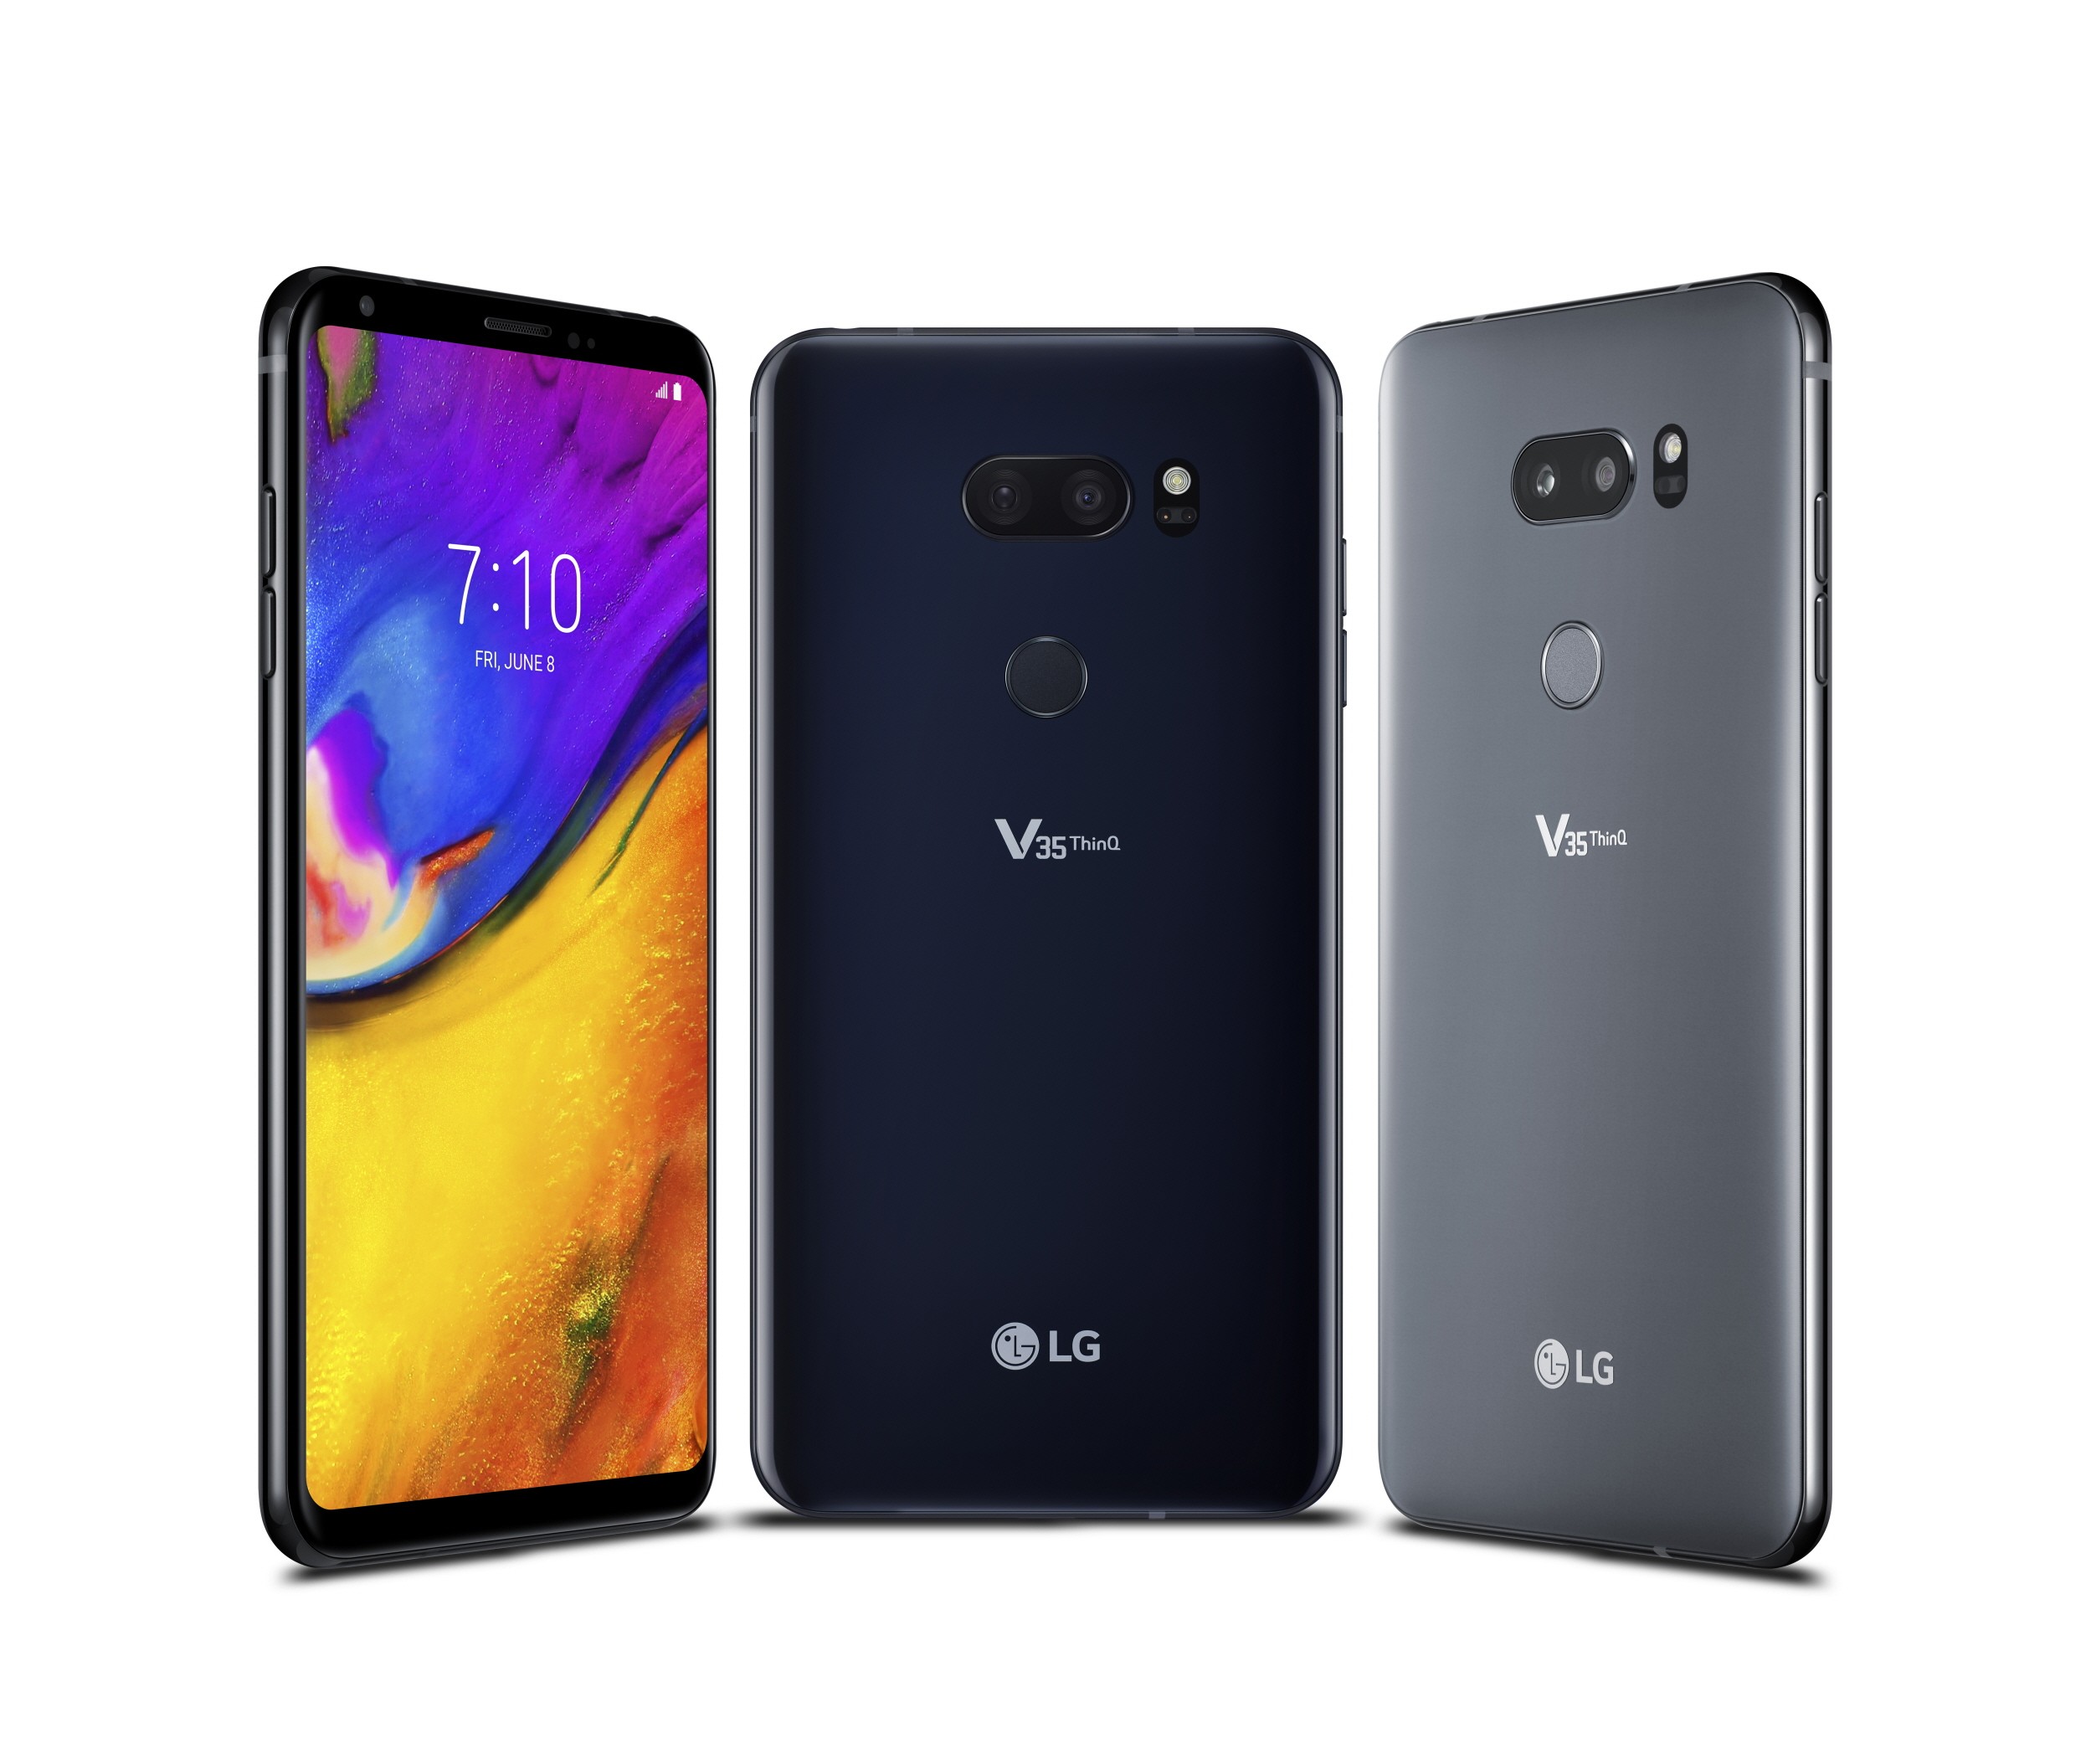 The front and back view of the LG V35 ThinQ in New Aurora Black and New Platinum Gray